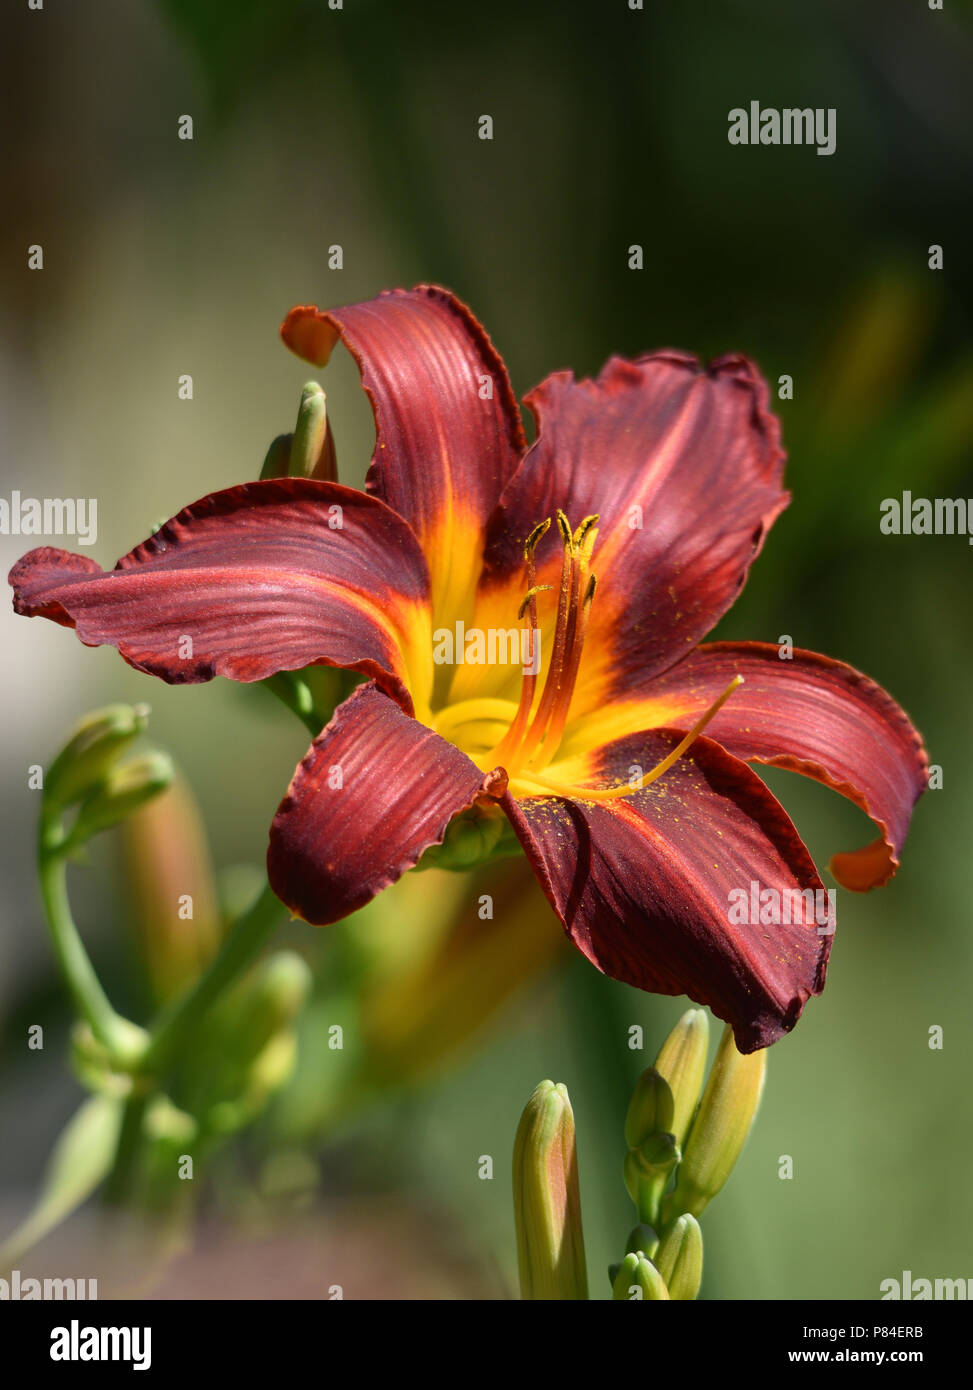 Dark red and yellow day lily flower Stock Photo